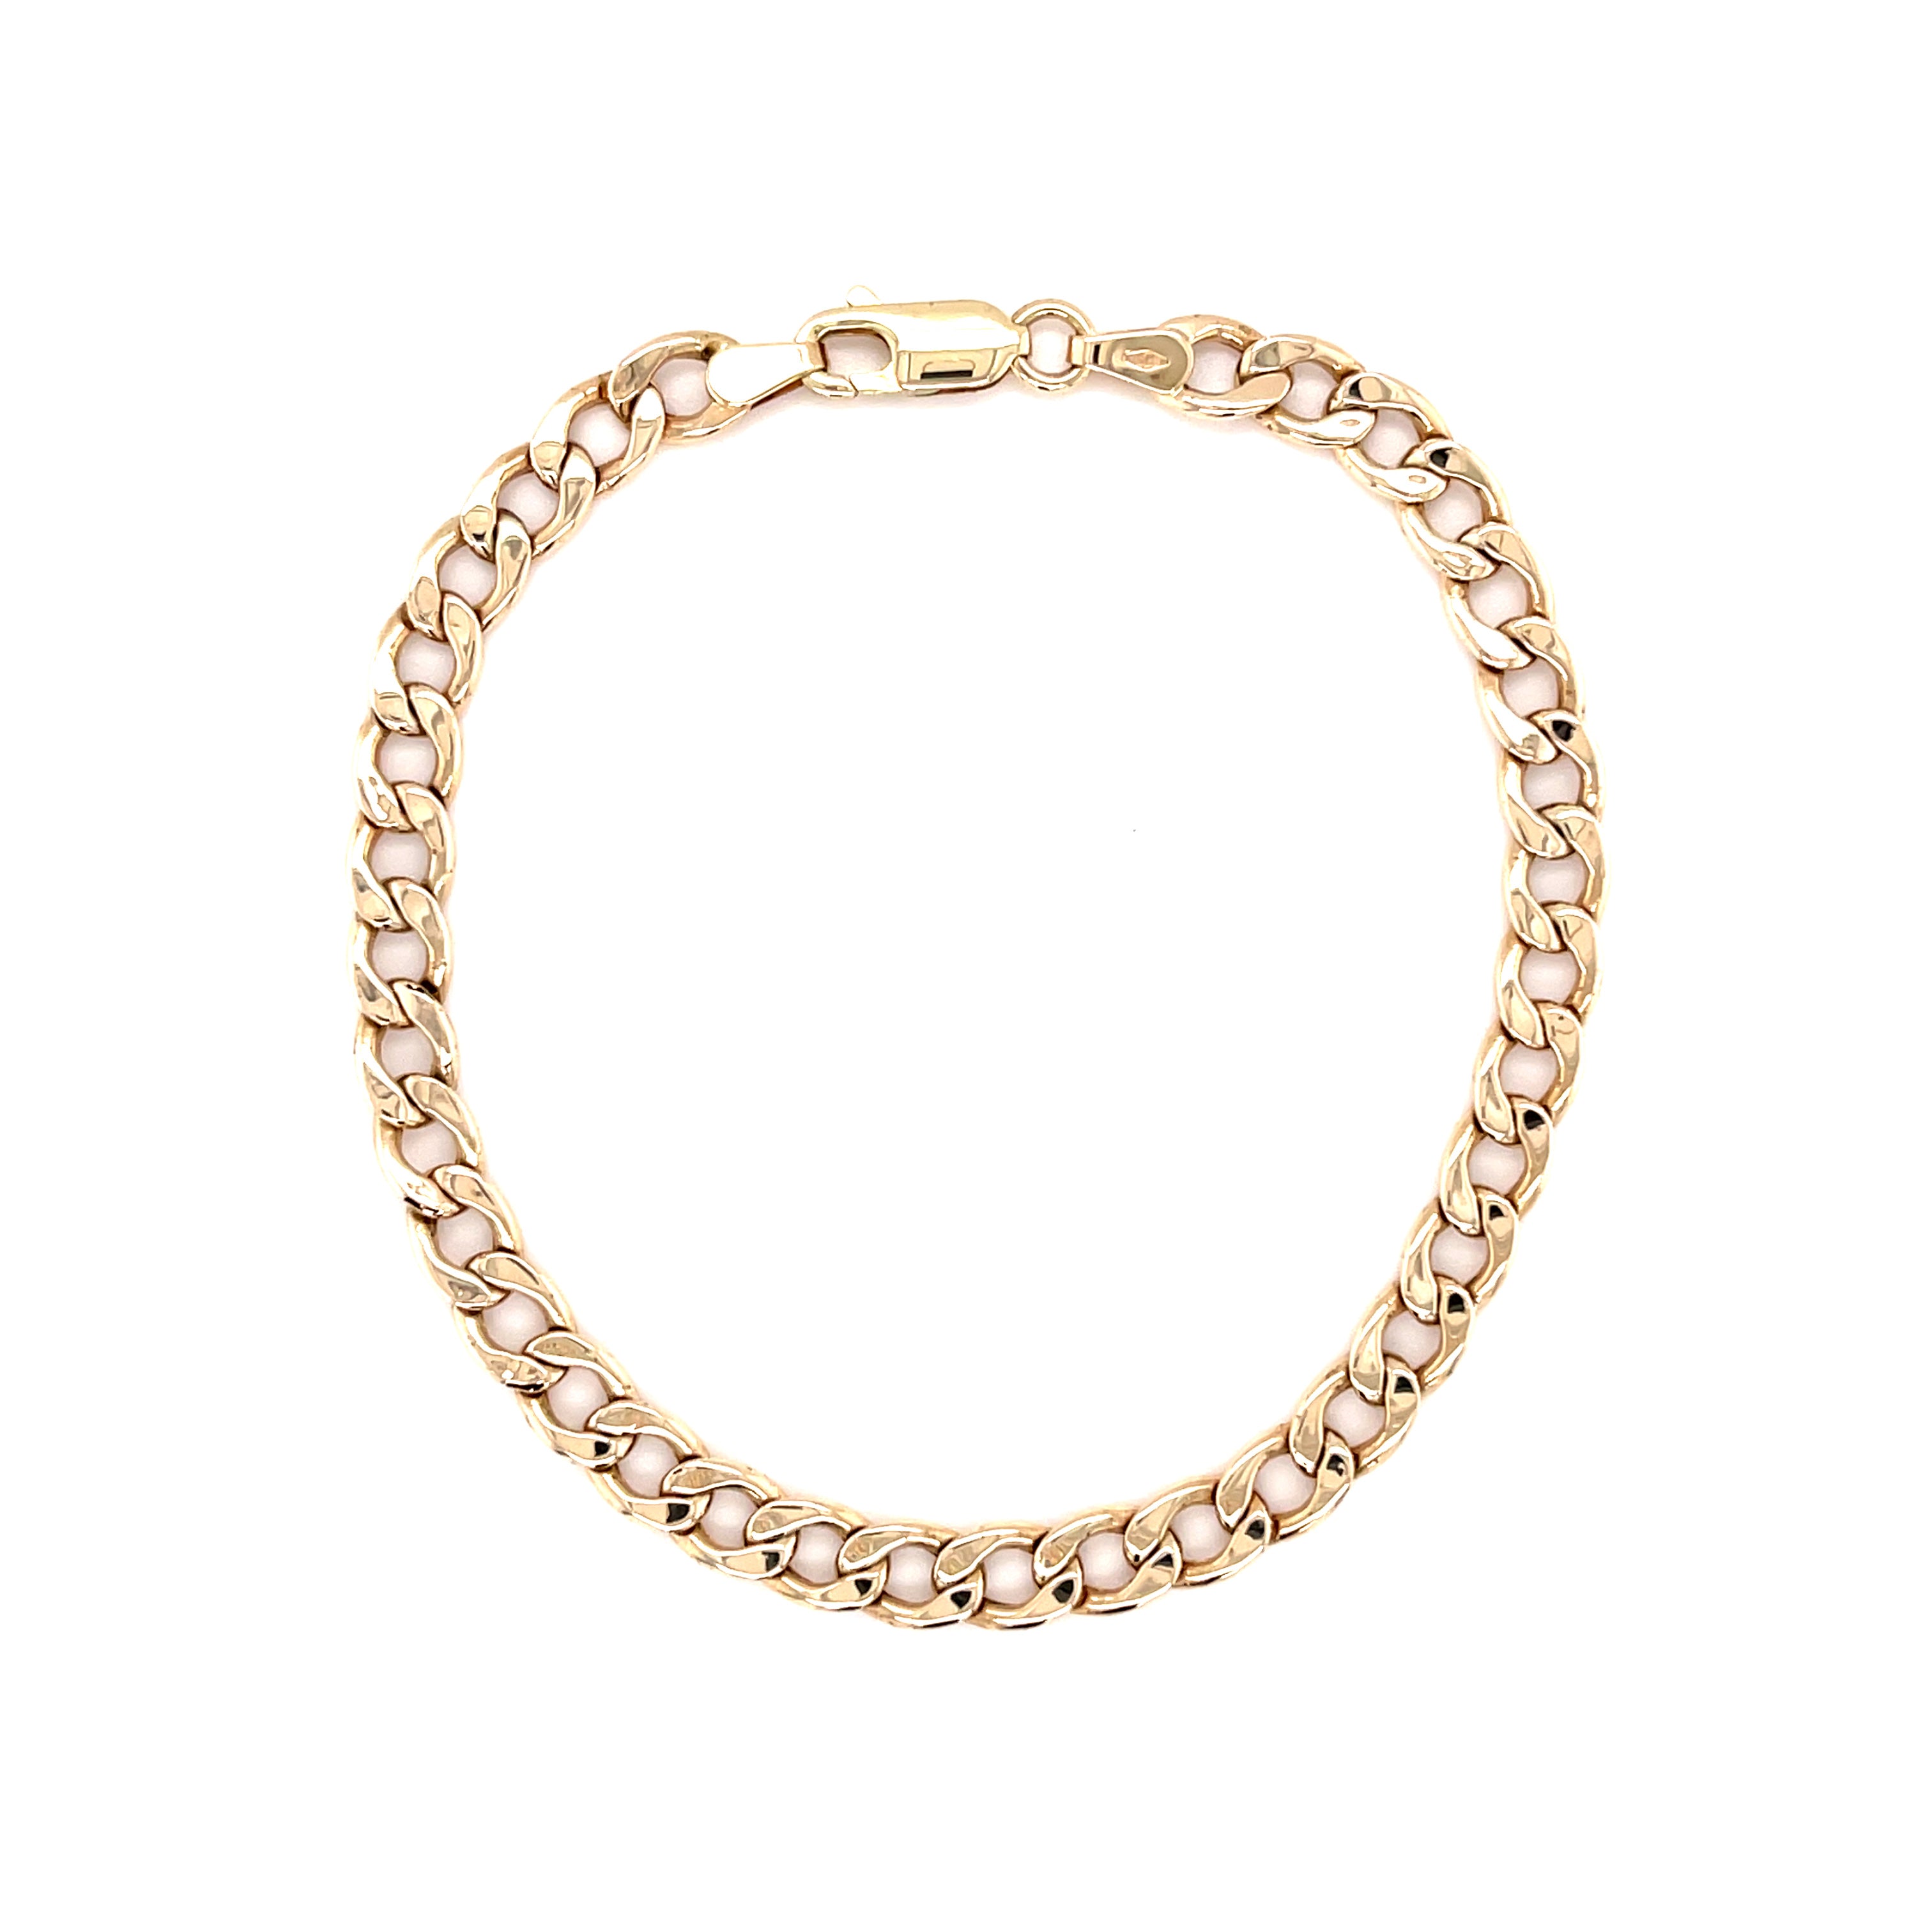 9ct Yellow Gold 7.5" Hollow Curb Link Bracelet - 3.50g SOLD